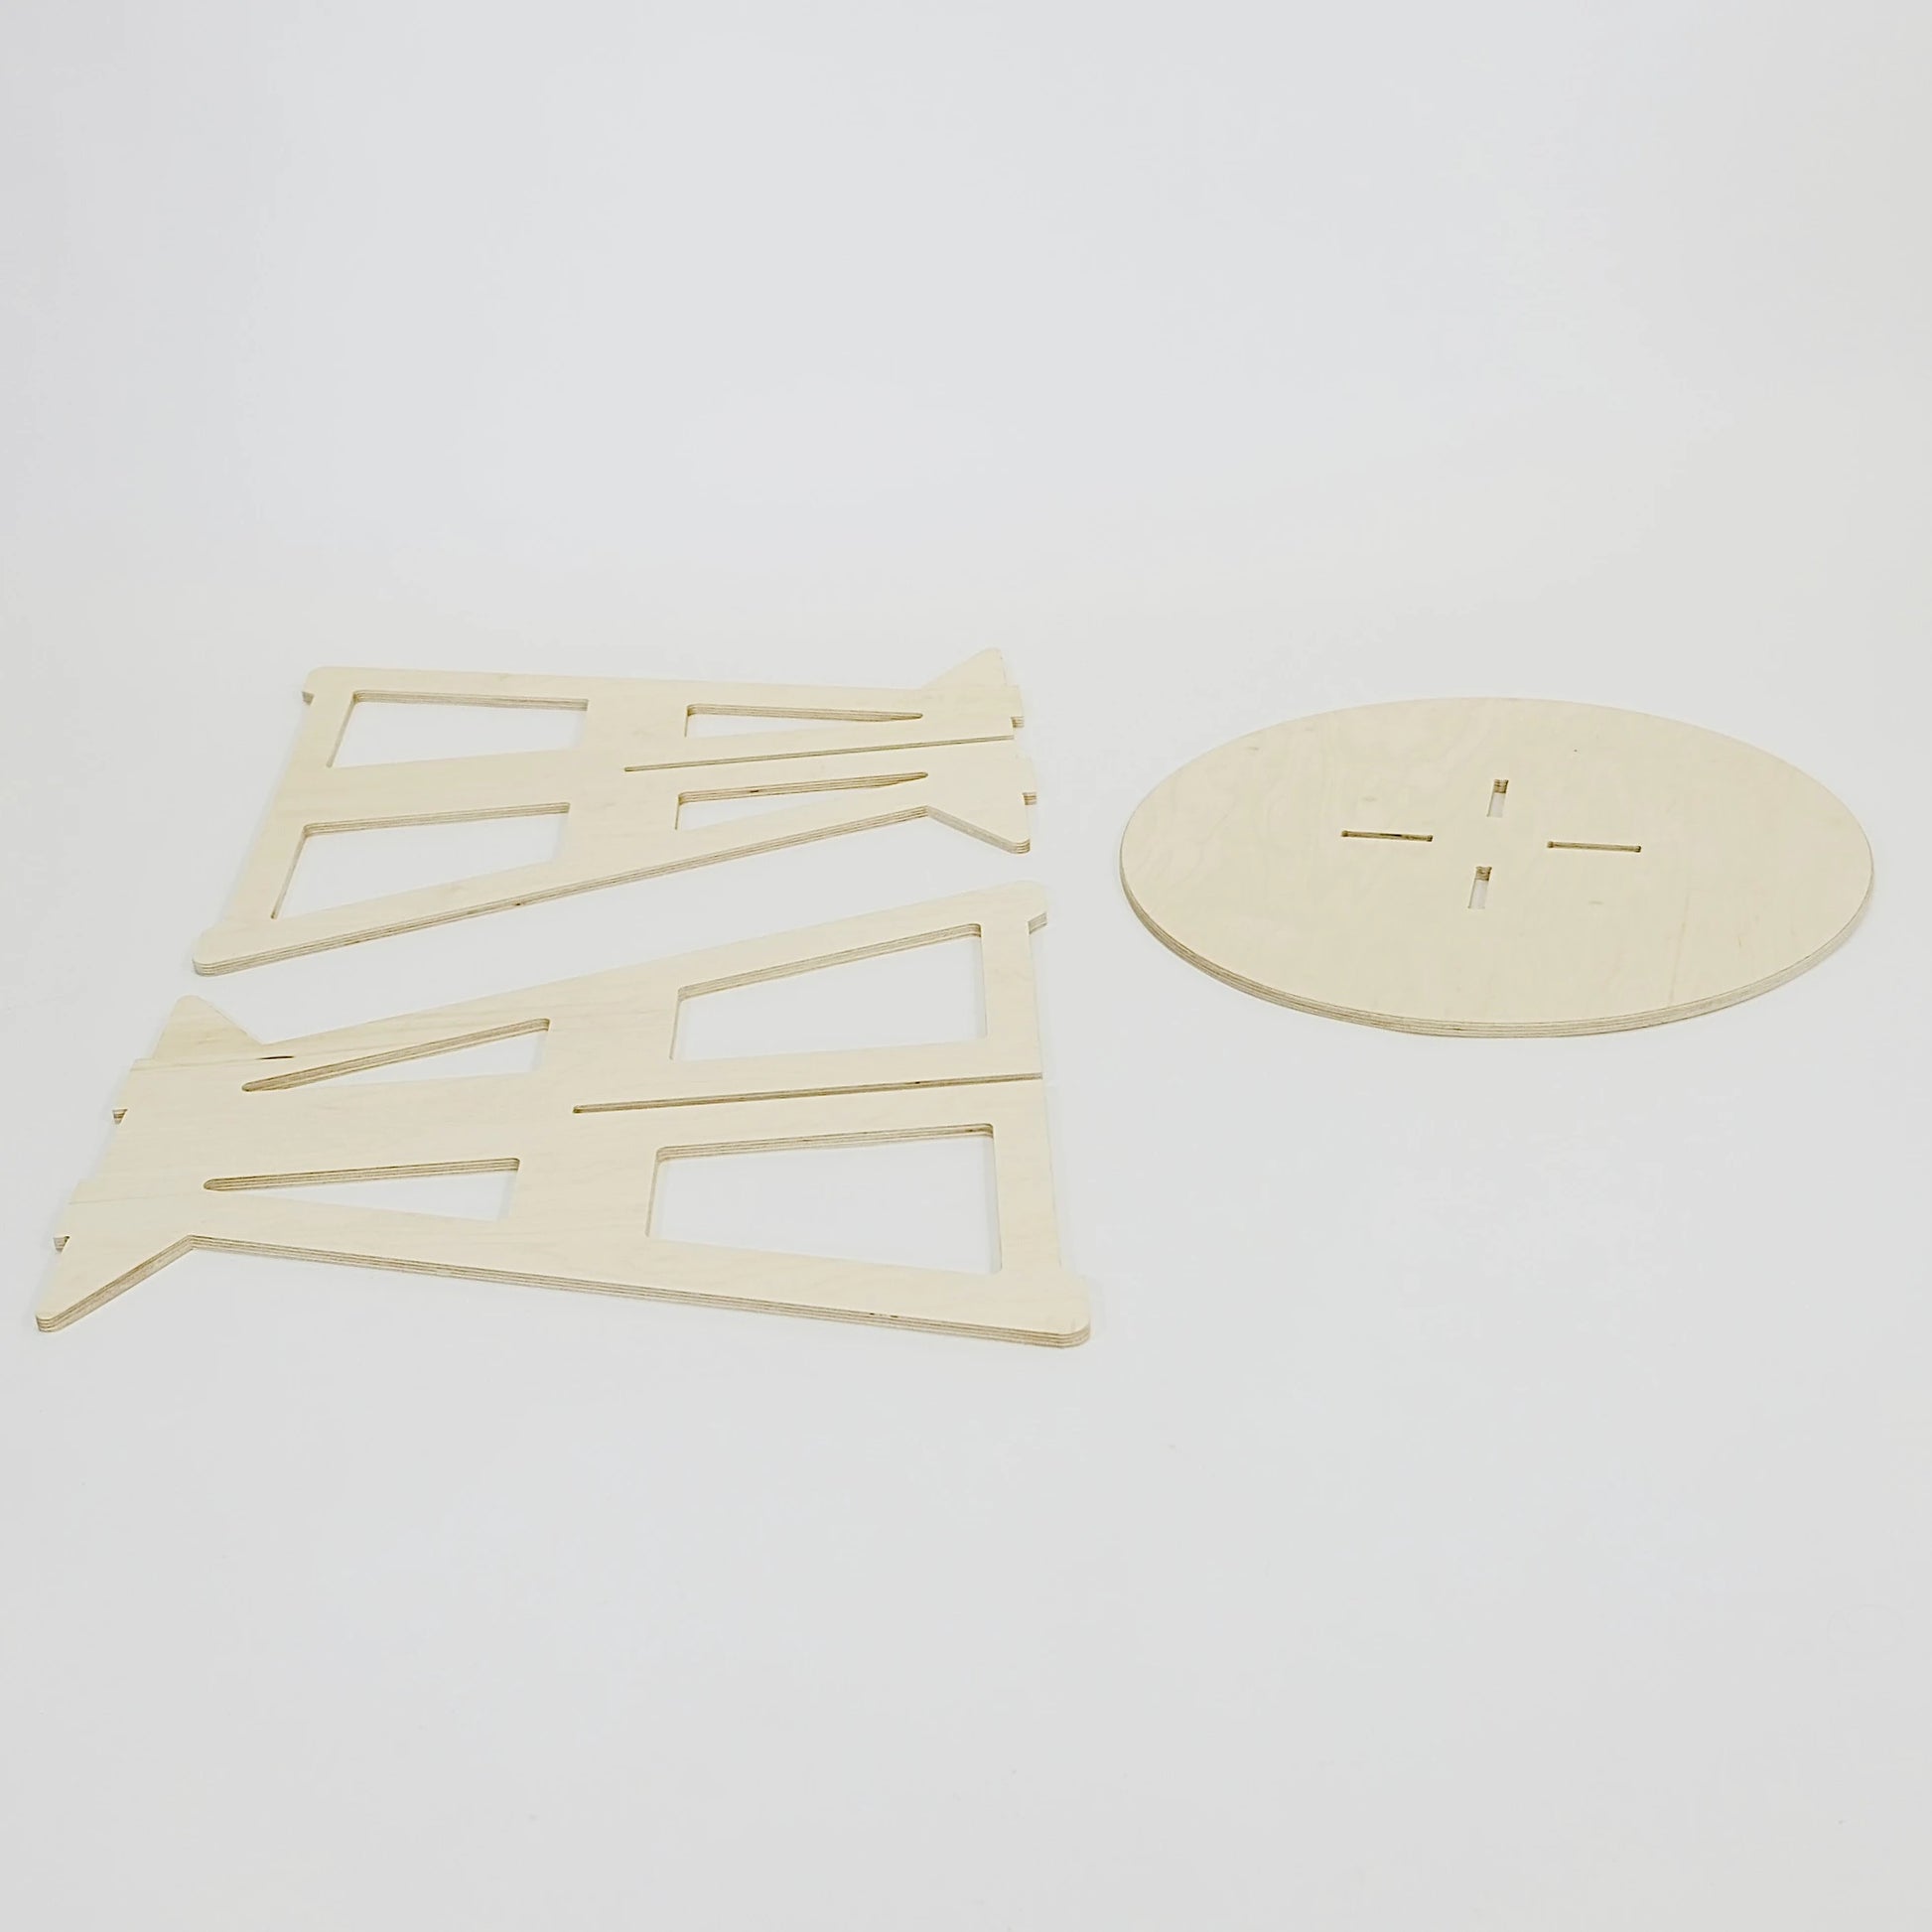 Flat lay of the table separated into its component parts. The wood is pale coloured. The top is round and the two legs are triangle shaped.